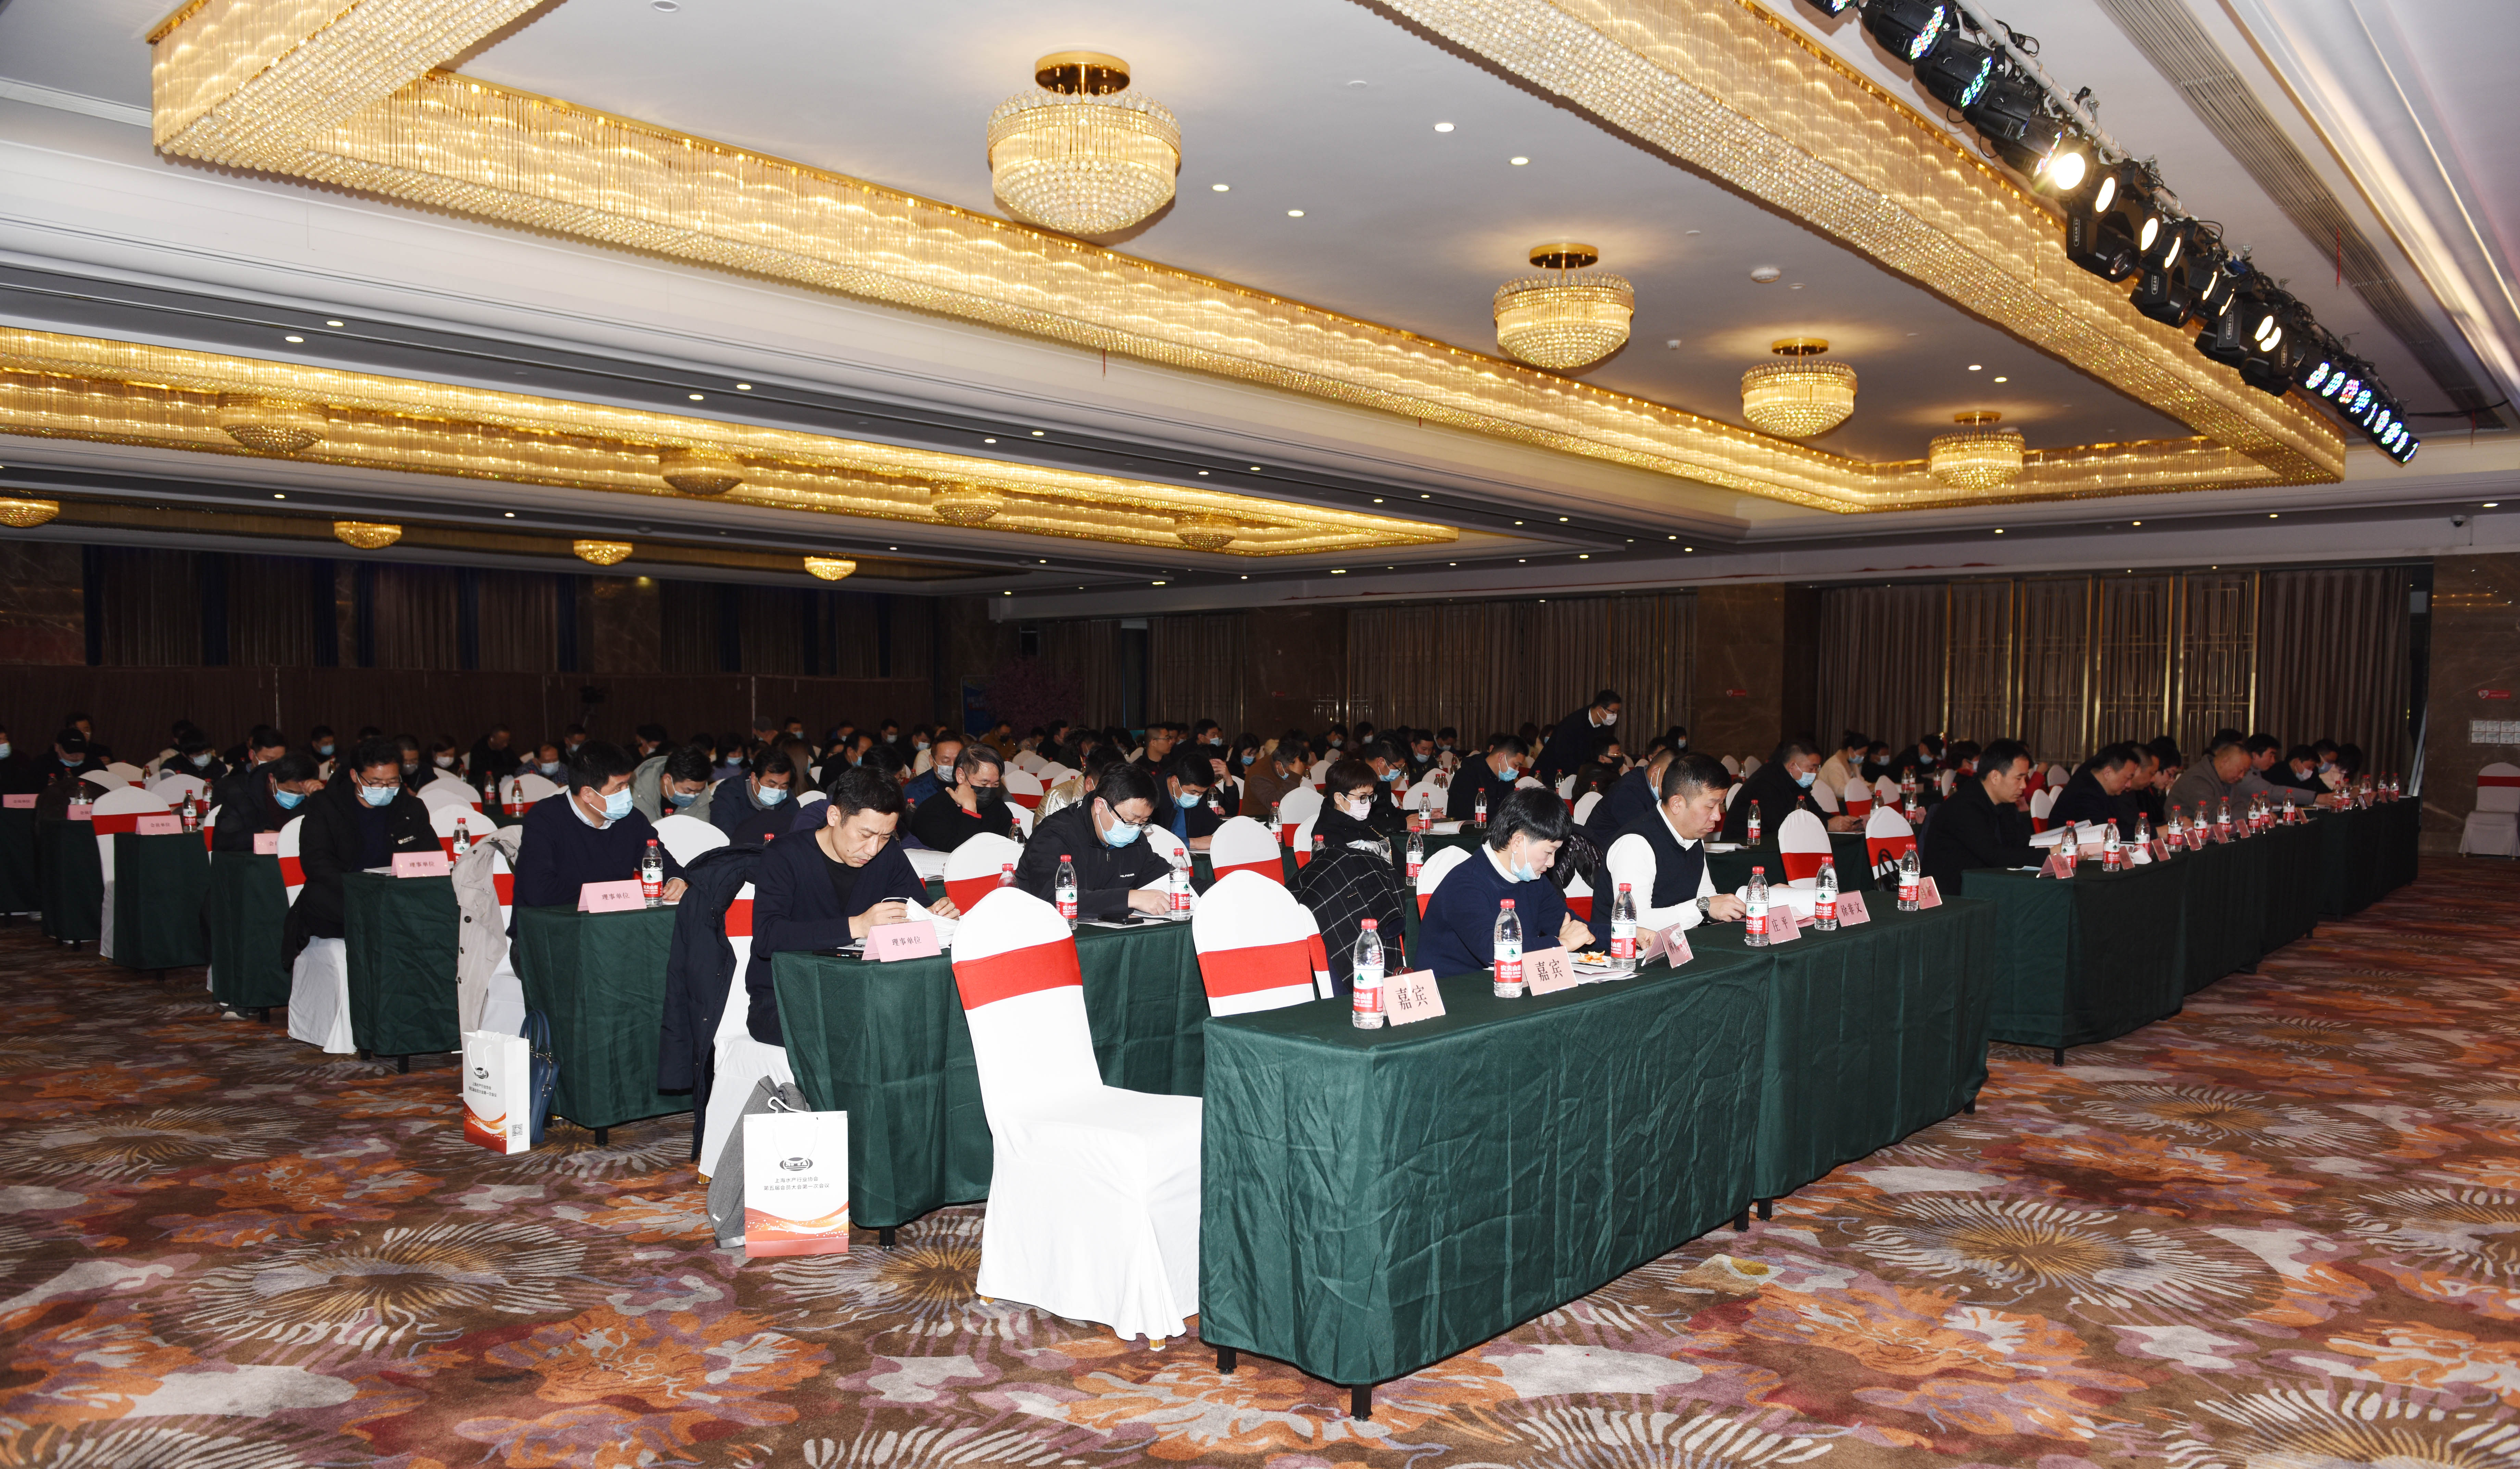 Set sail and create a new future丨 Aige Exhibition attended the annual conference of SFIA(图2)